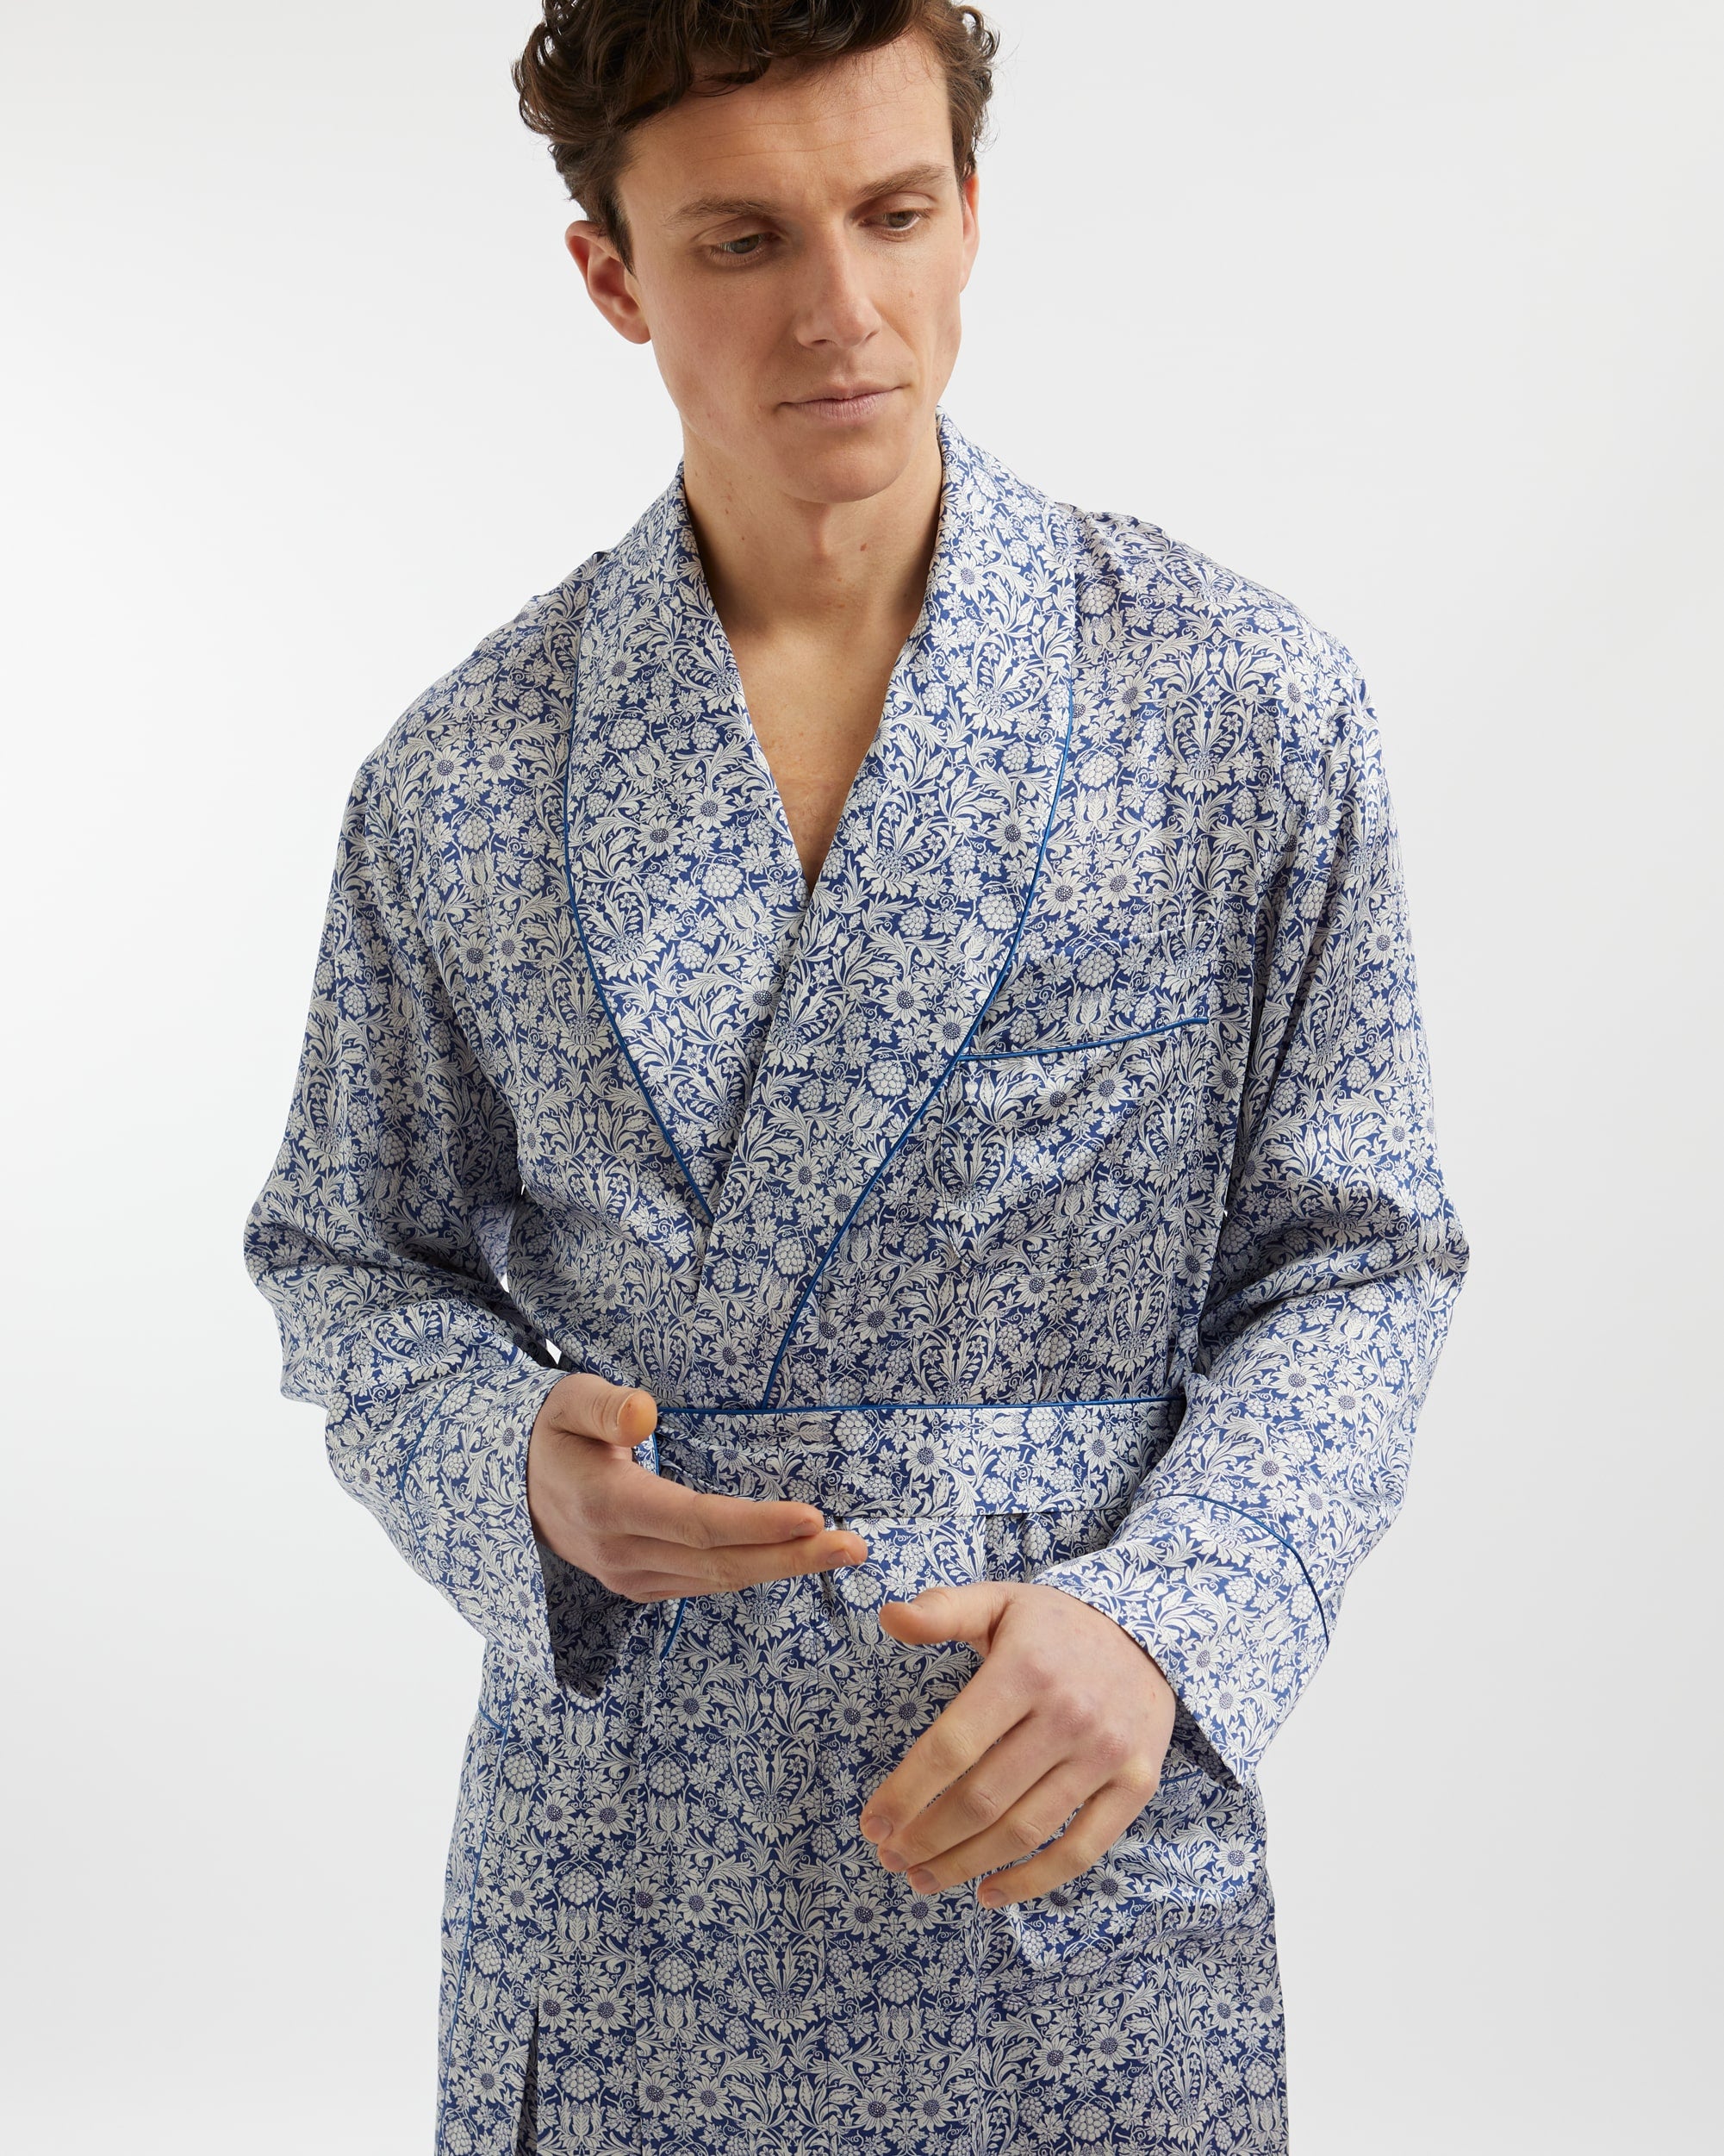 Premium terry towel wholesale retail - Noble men´s bathrobe made of light  weight jersey stretch material.